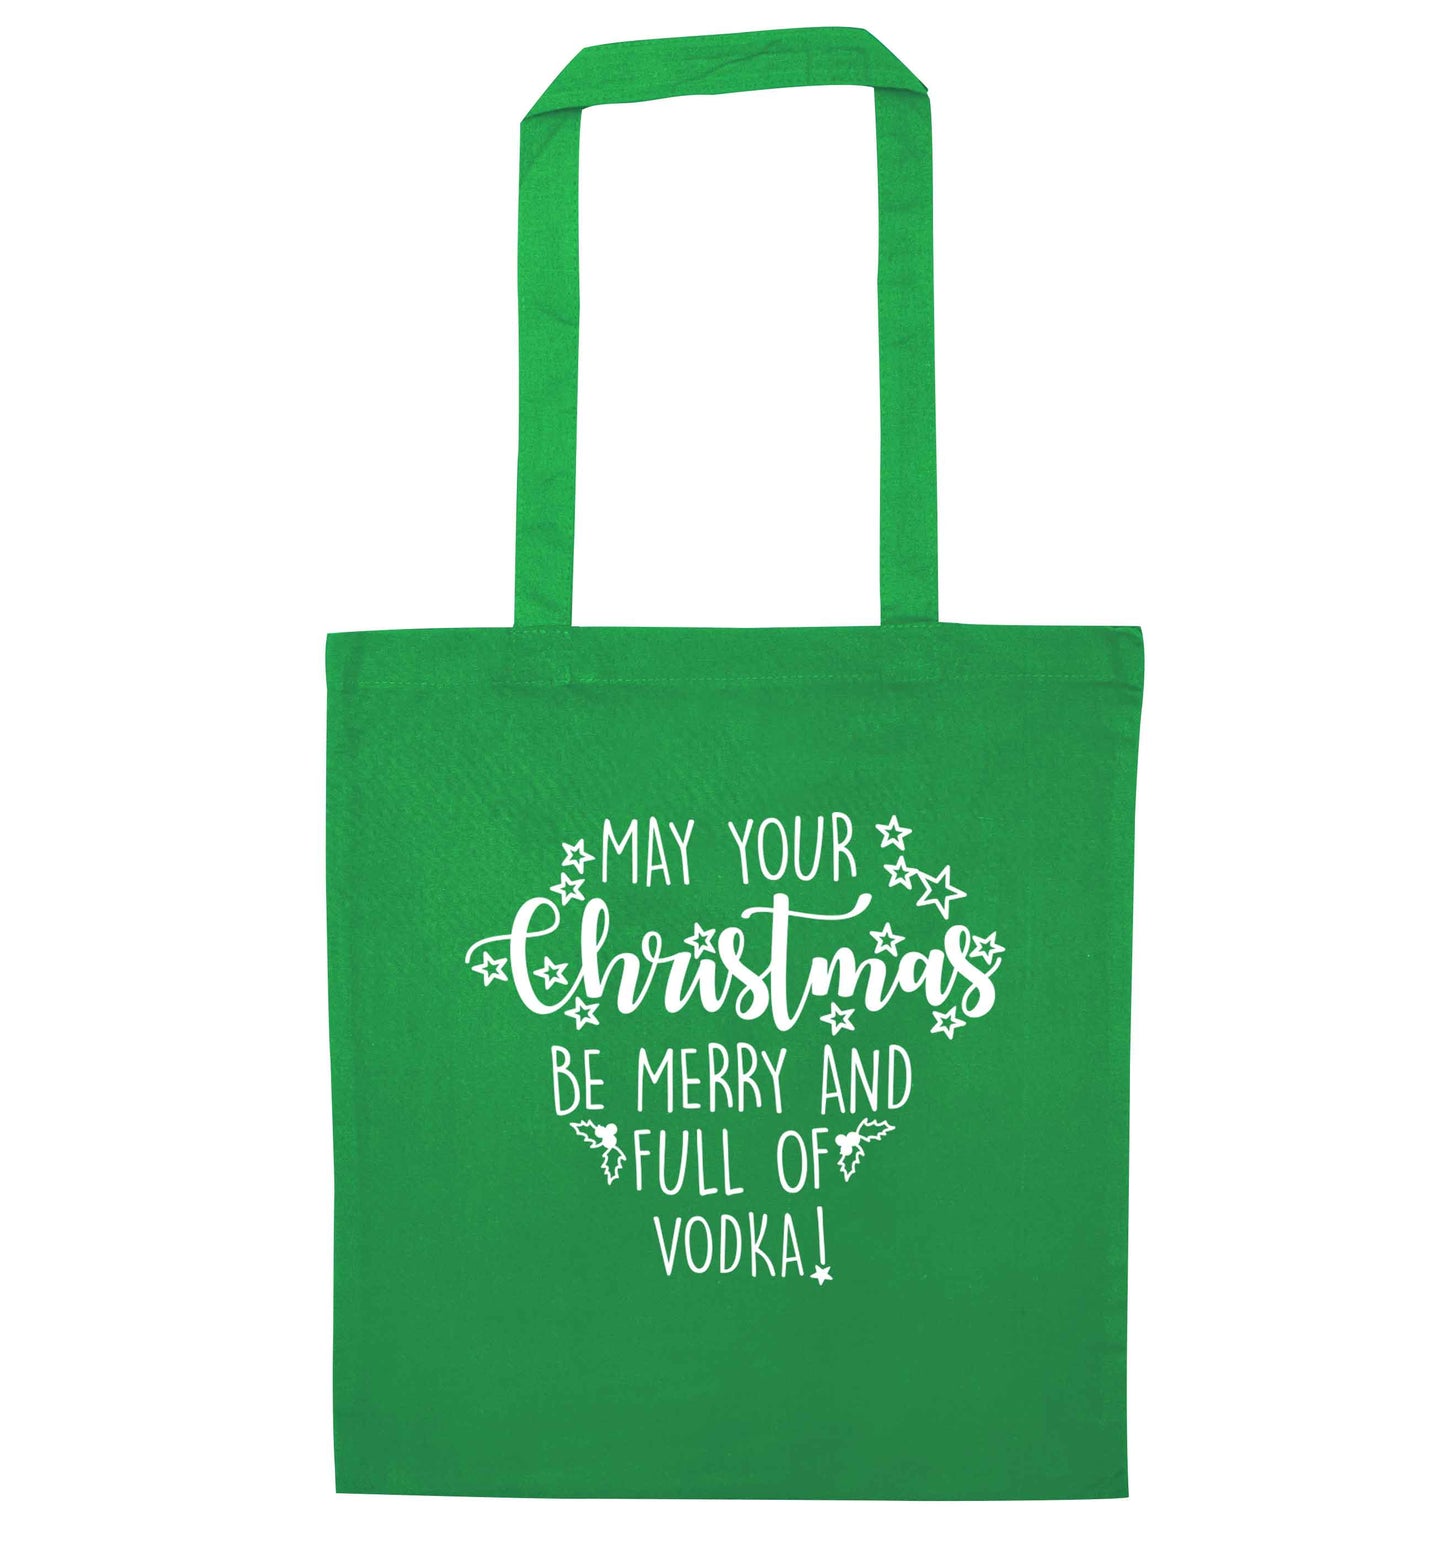 May your Christmas be merry and full of vodka green tote bag